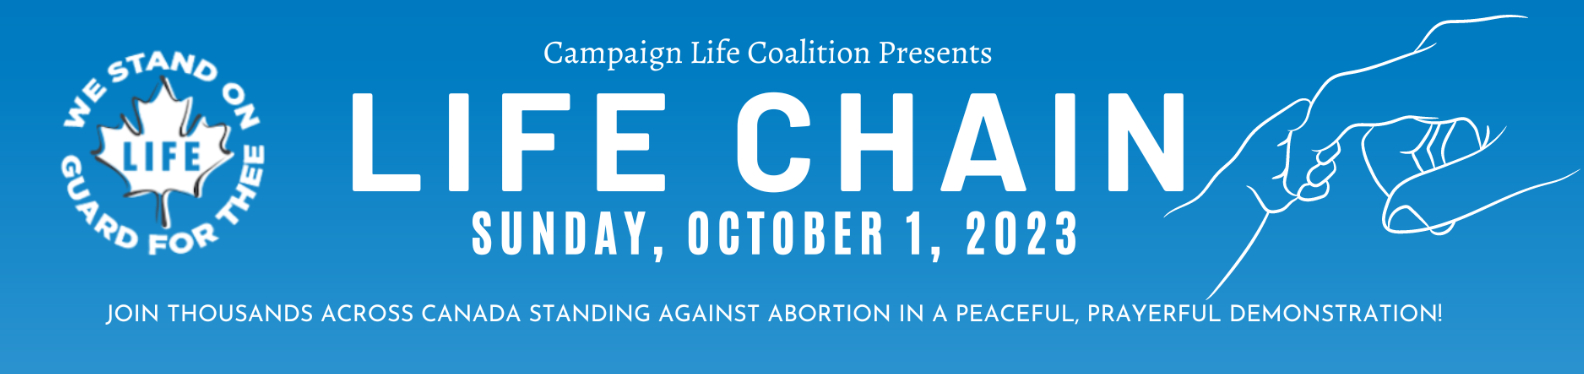 Campaign life Coalition presents Life Chain, Sunday October 1, Join thousands across canada standing against abortion in a peaceful prayerful demonstration